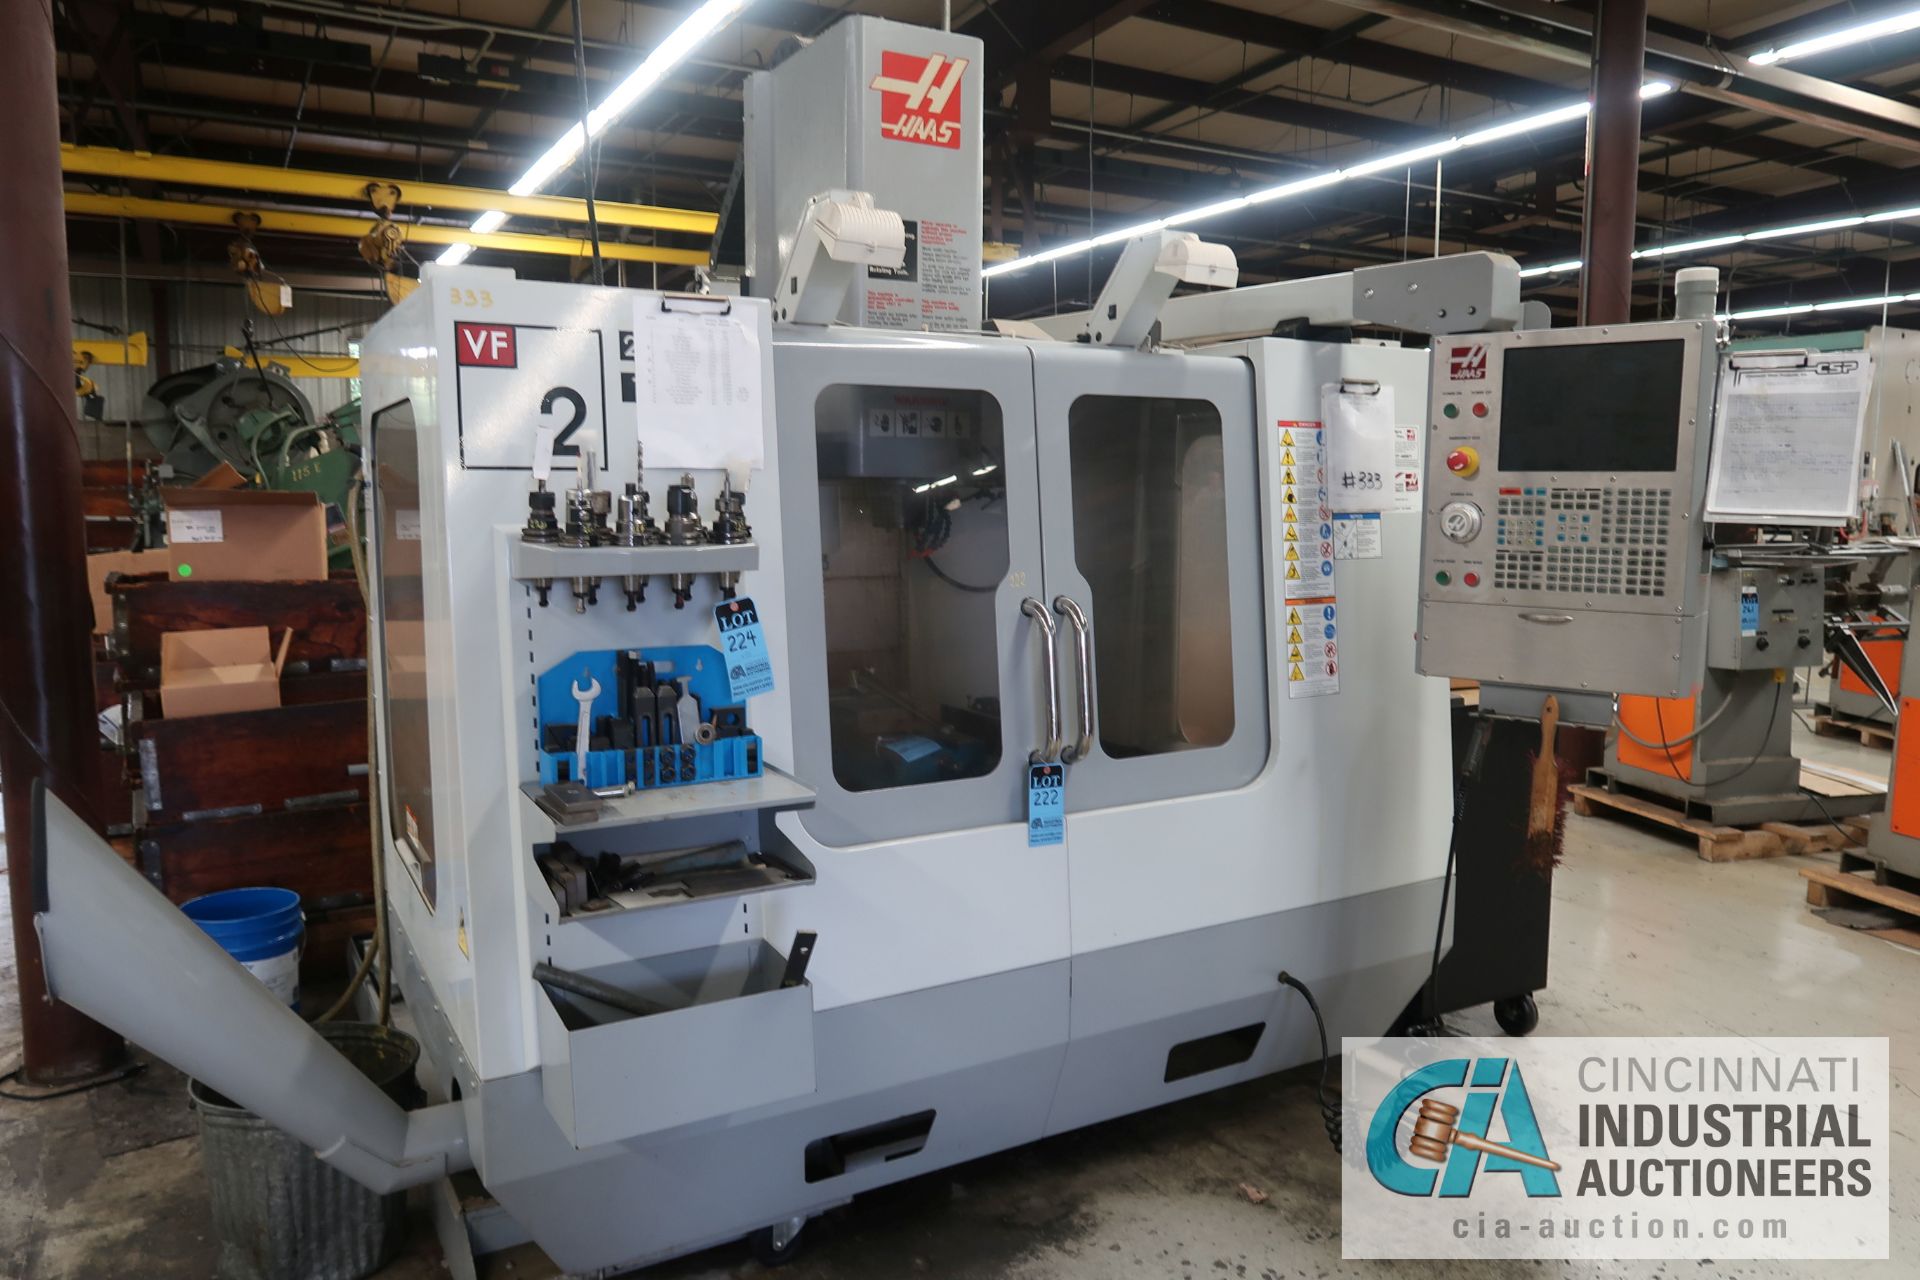 HAAS MODEL VF2B CNC VERTICAL MACHINING CENTER; Only 146 Cutting hours showing see last photo